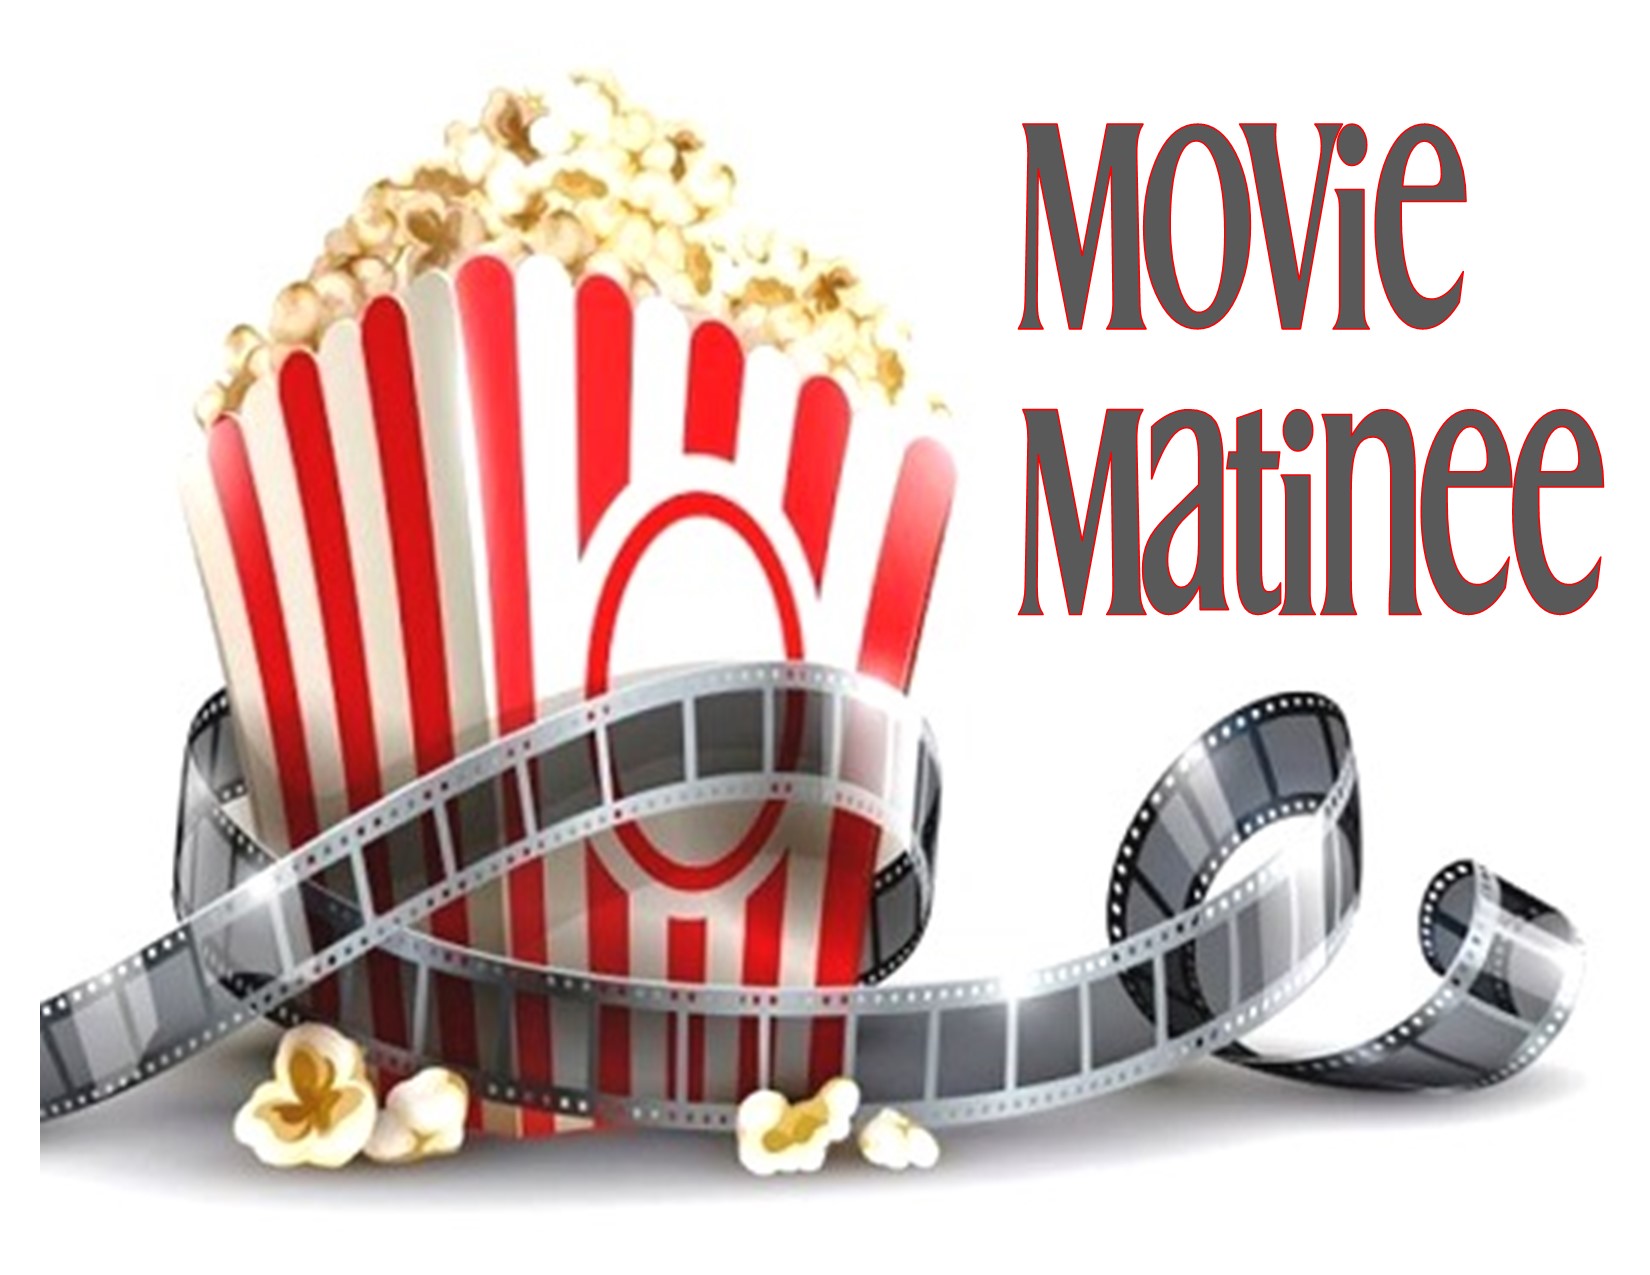 Box of popcorn with a film reel and "Movie Matinee"